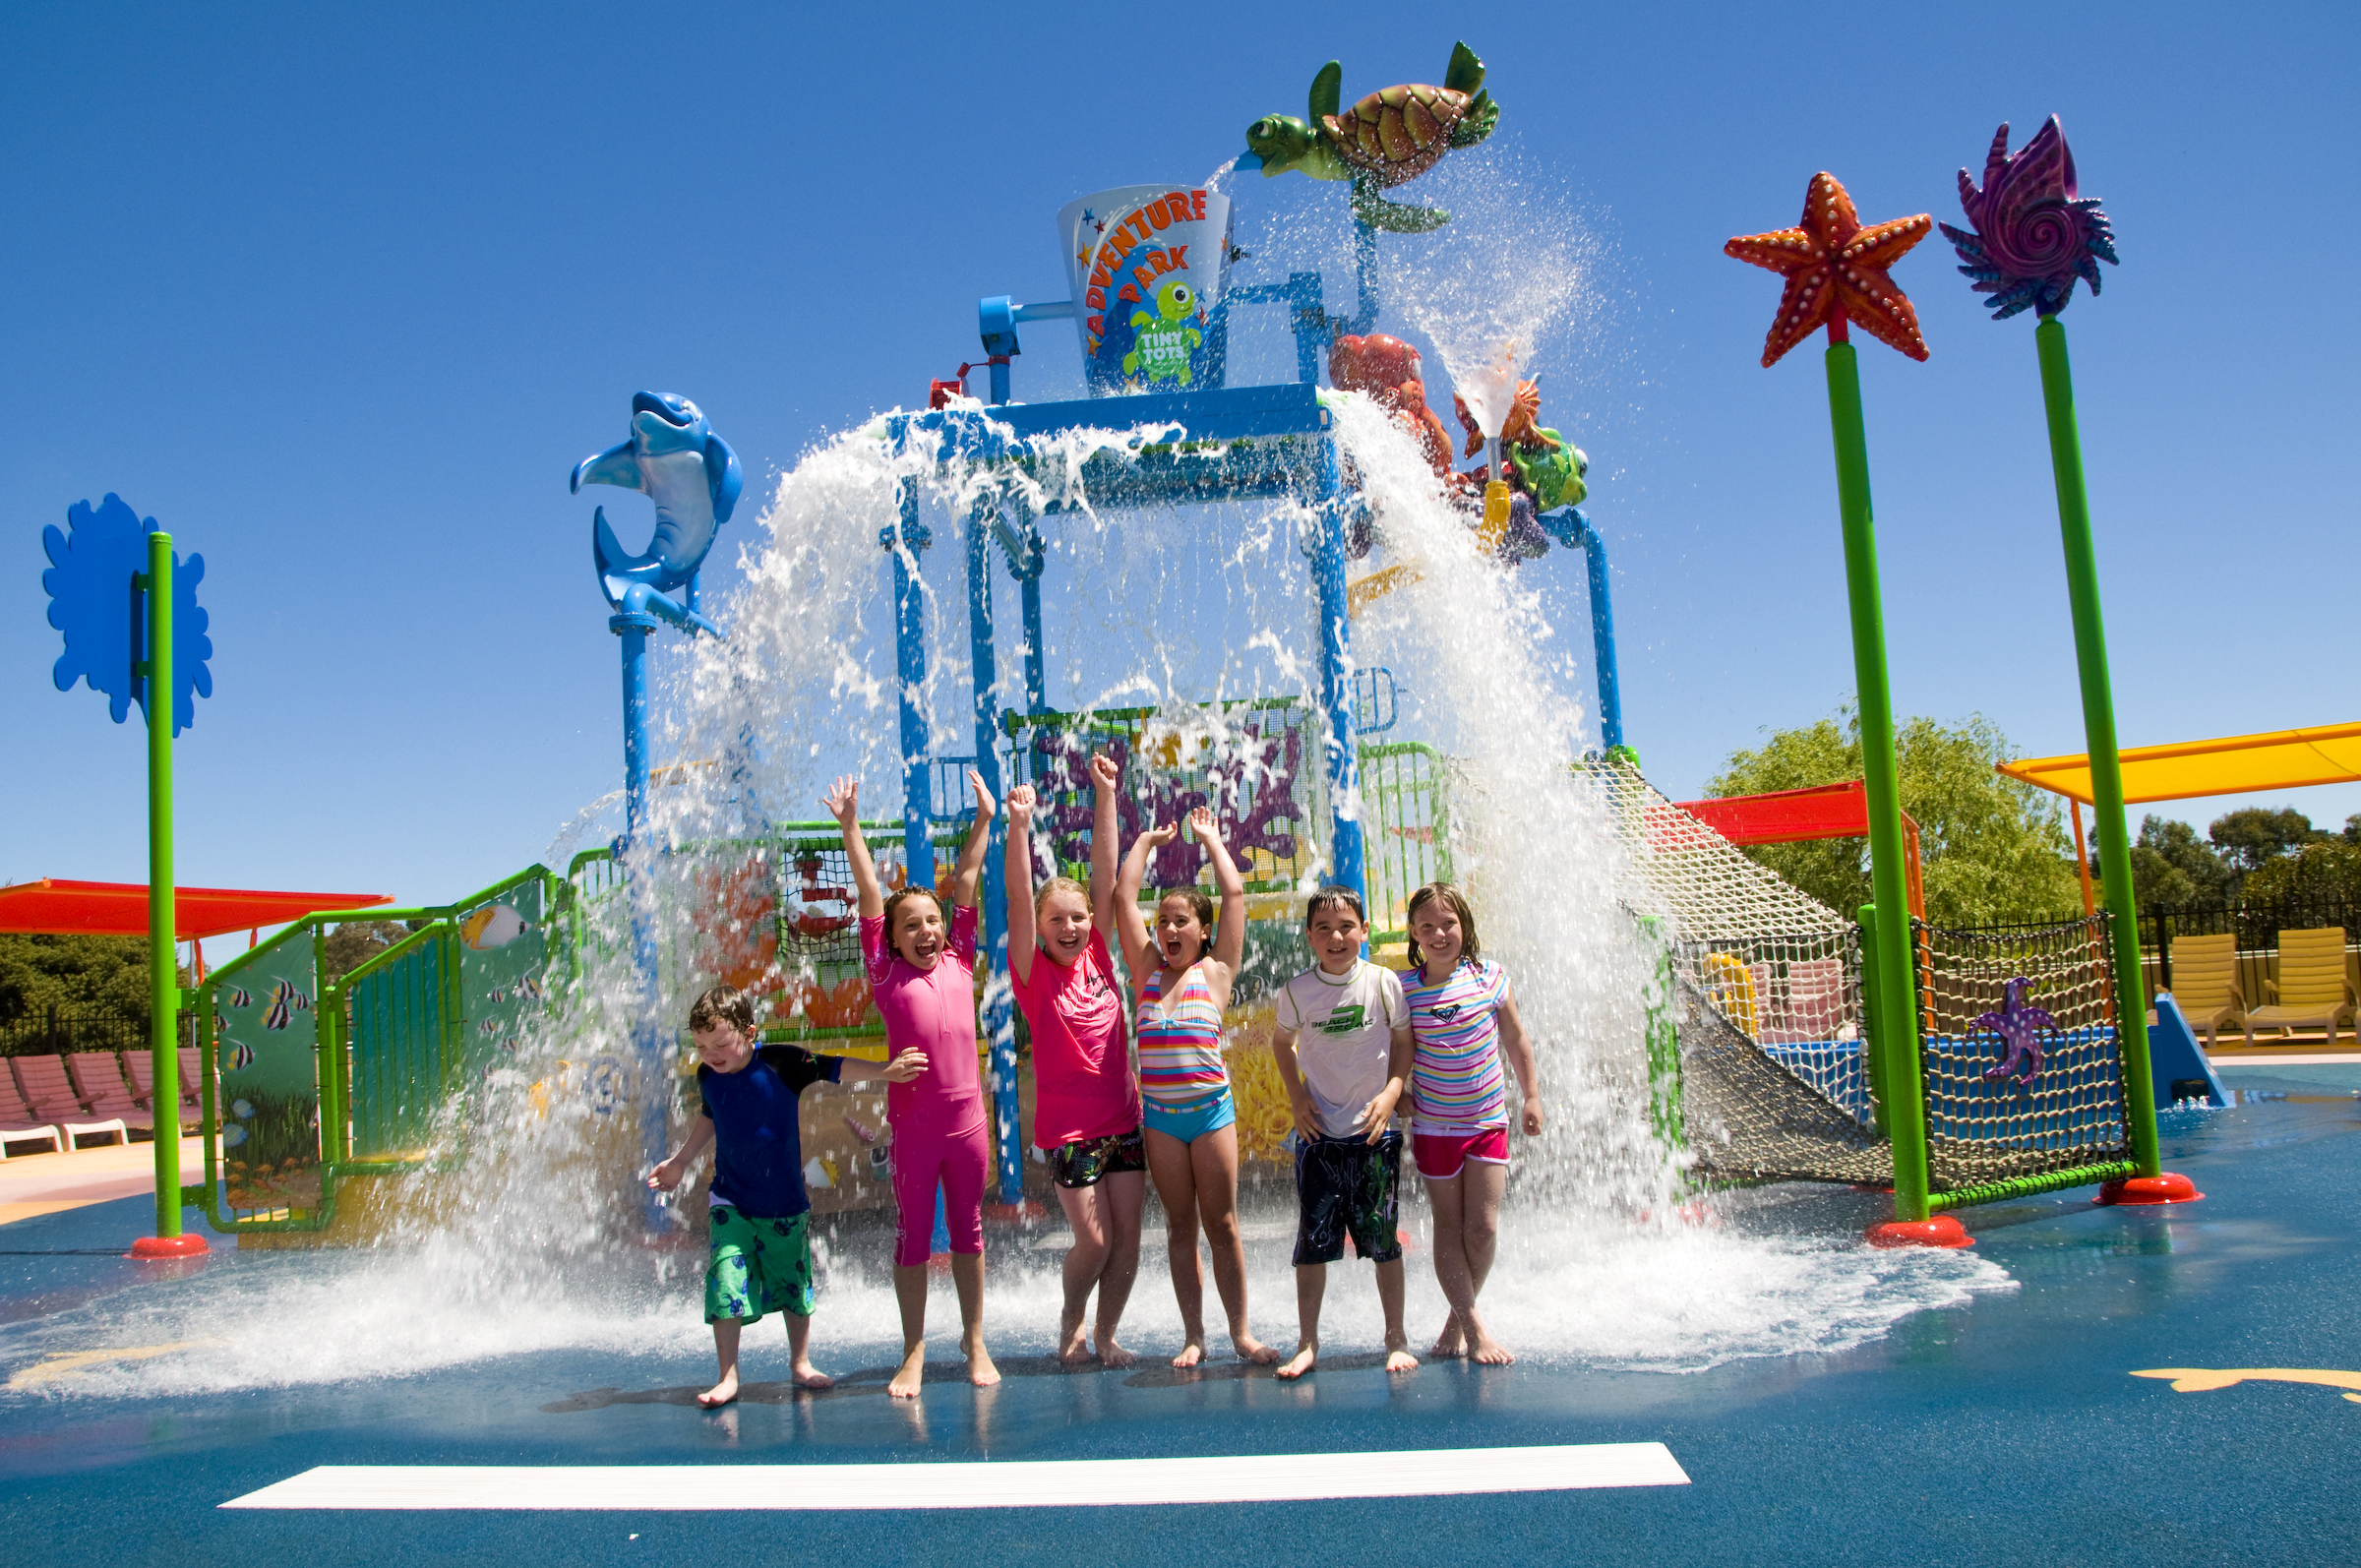 Children in front of water play structure